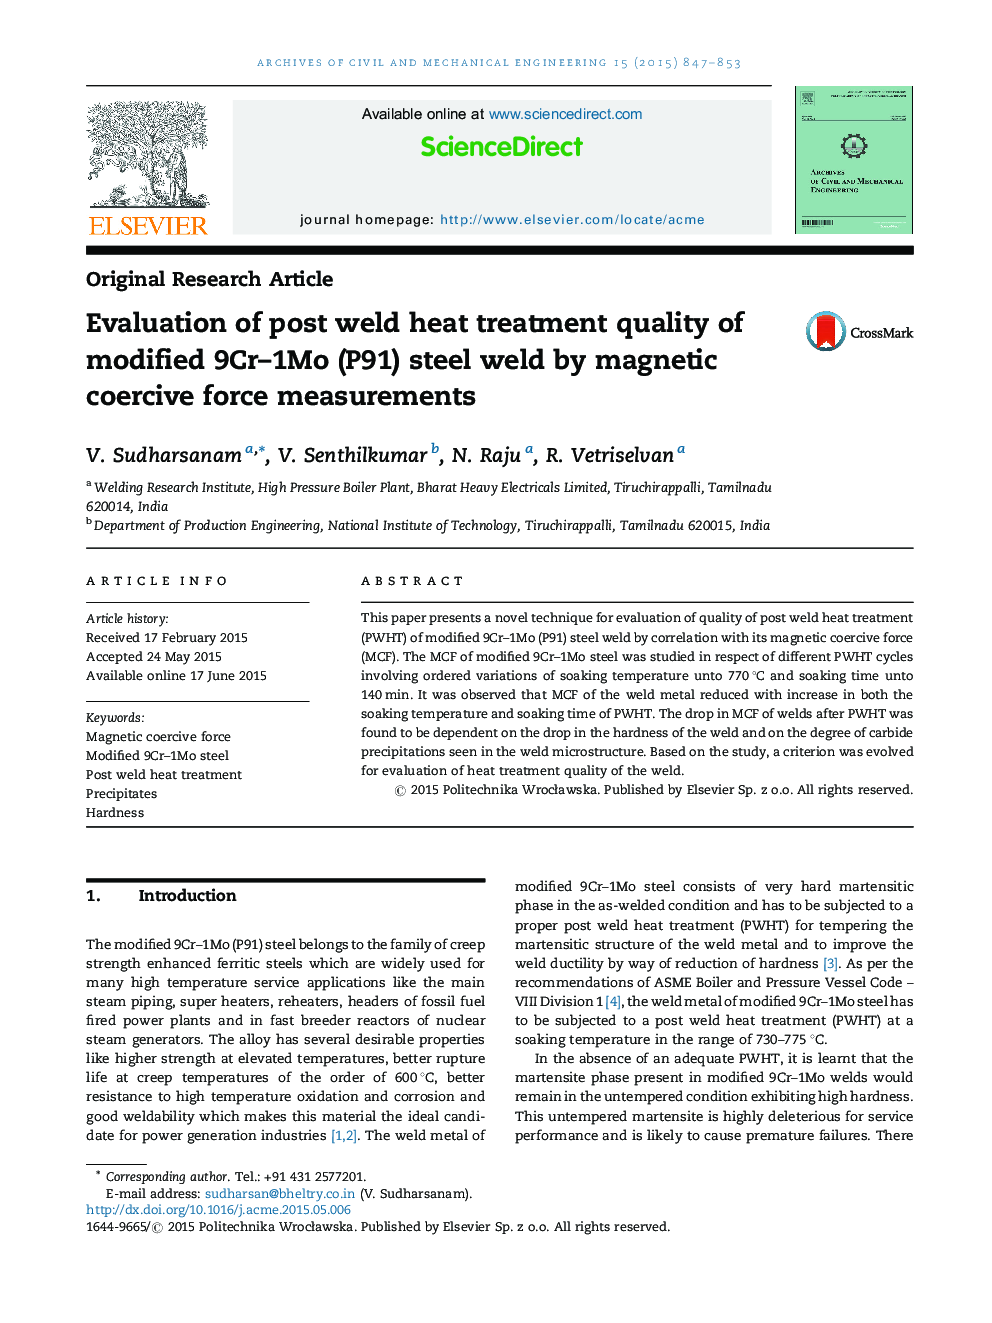 Evaluation of post weld heat treatment quality of modified 9Cr–1Mo (P91) steel weld by magnetic coercive force measurements